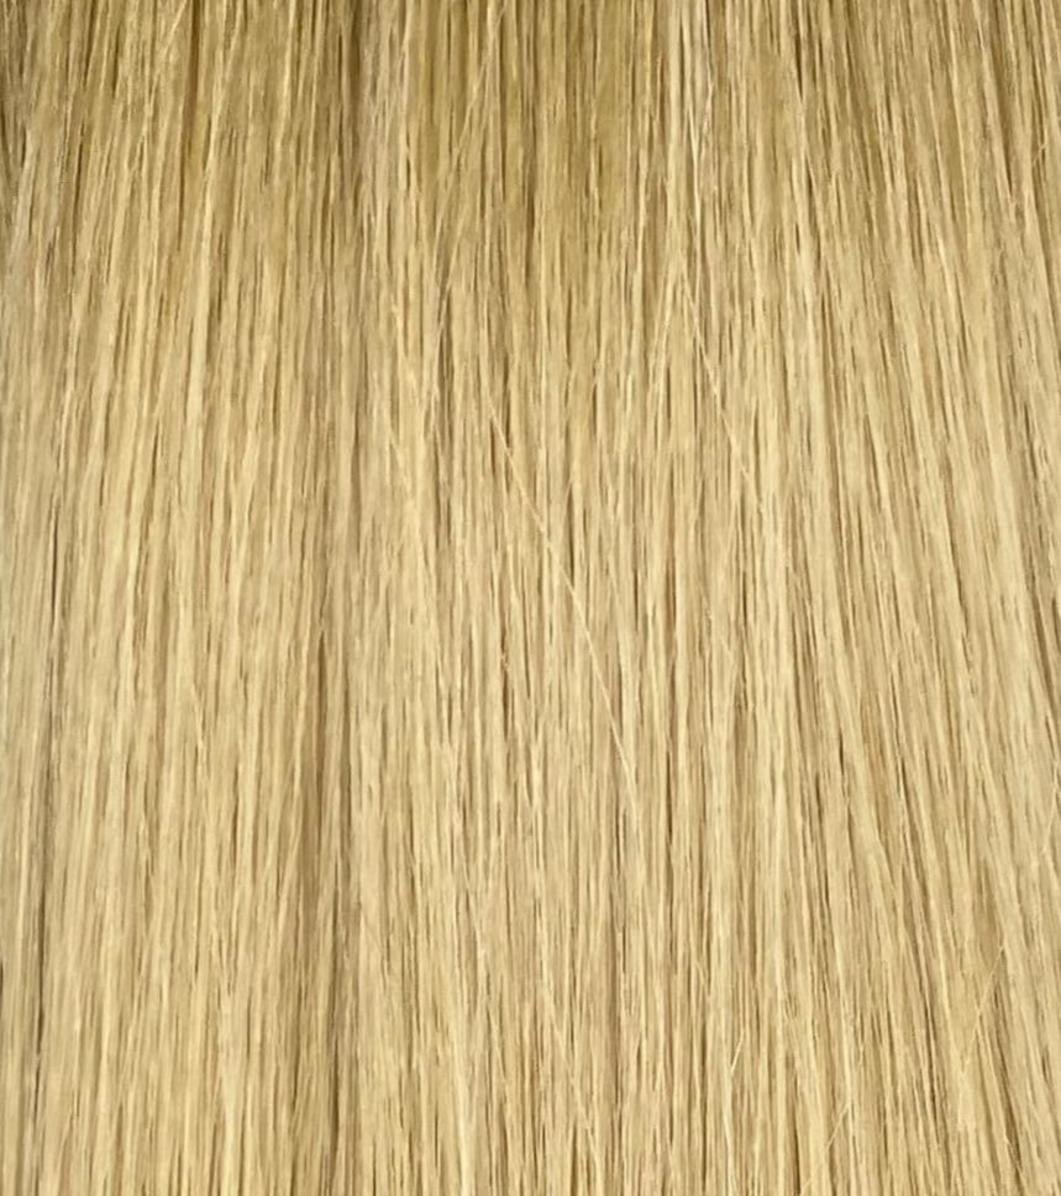 Weft hair extensions #10 & 20 - Single - 20 inches - Dark Ash Blonde into Light Ultra Blonde Ombre Weft DR Hair Products Co 